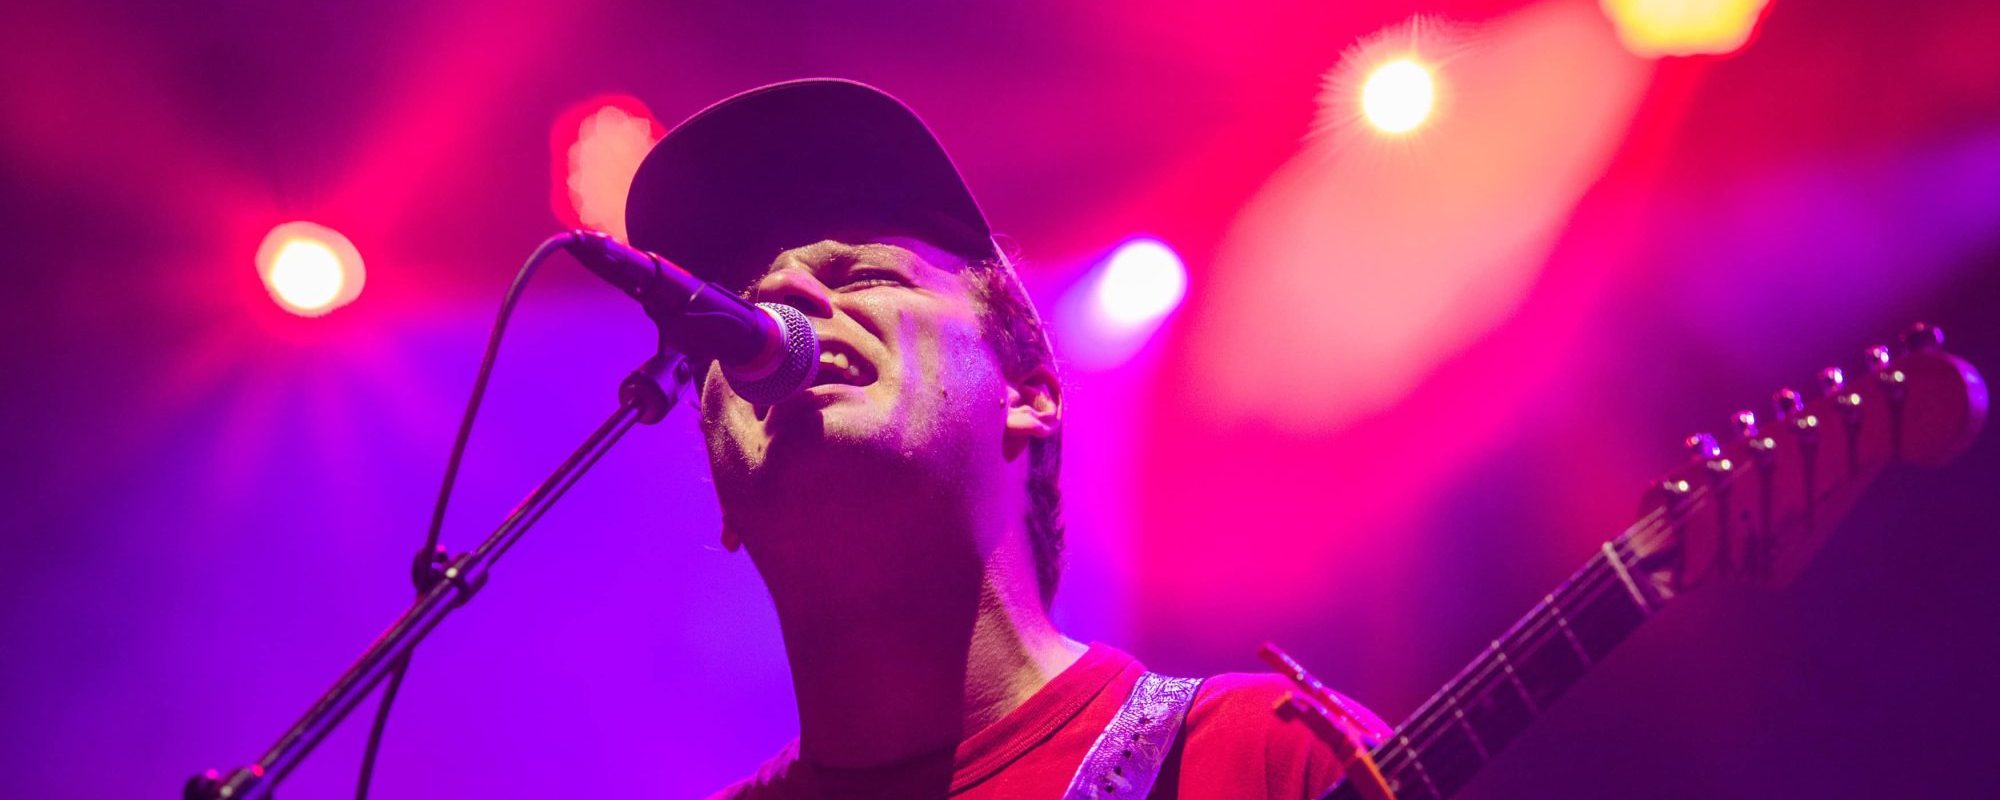 Mac DeMarco Releases Cover of Bing Crosby’s “I’ll Be Home for Christmas”